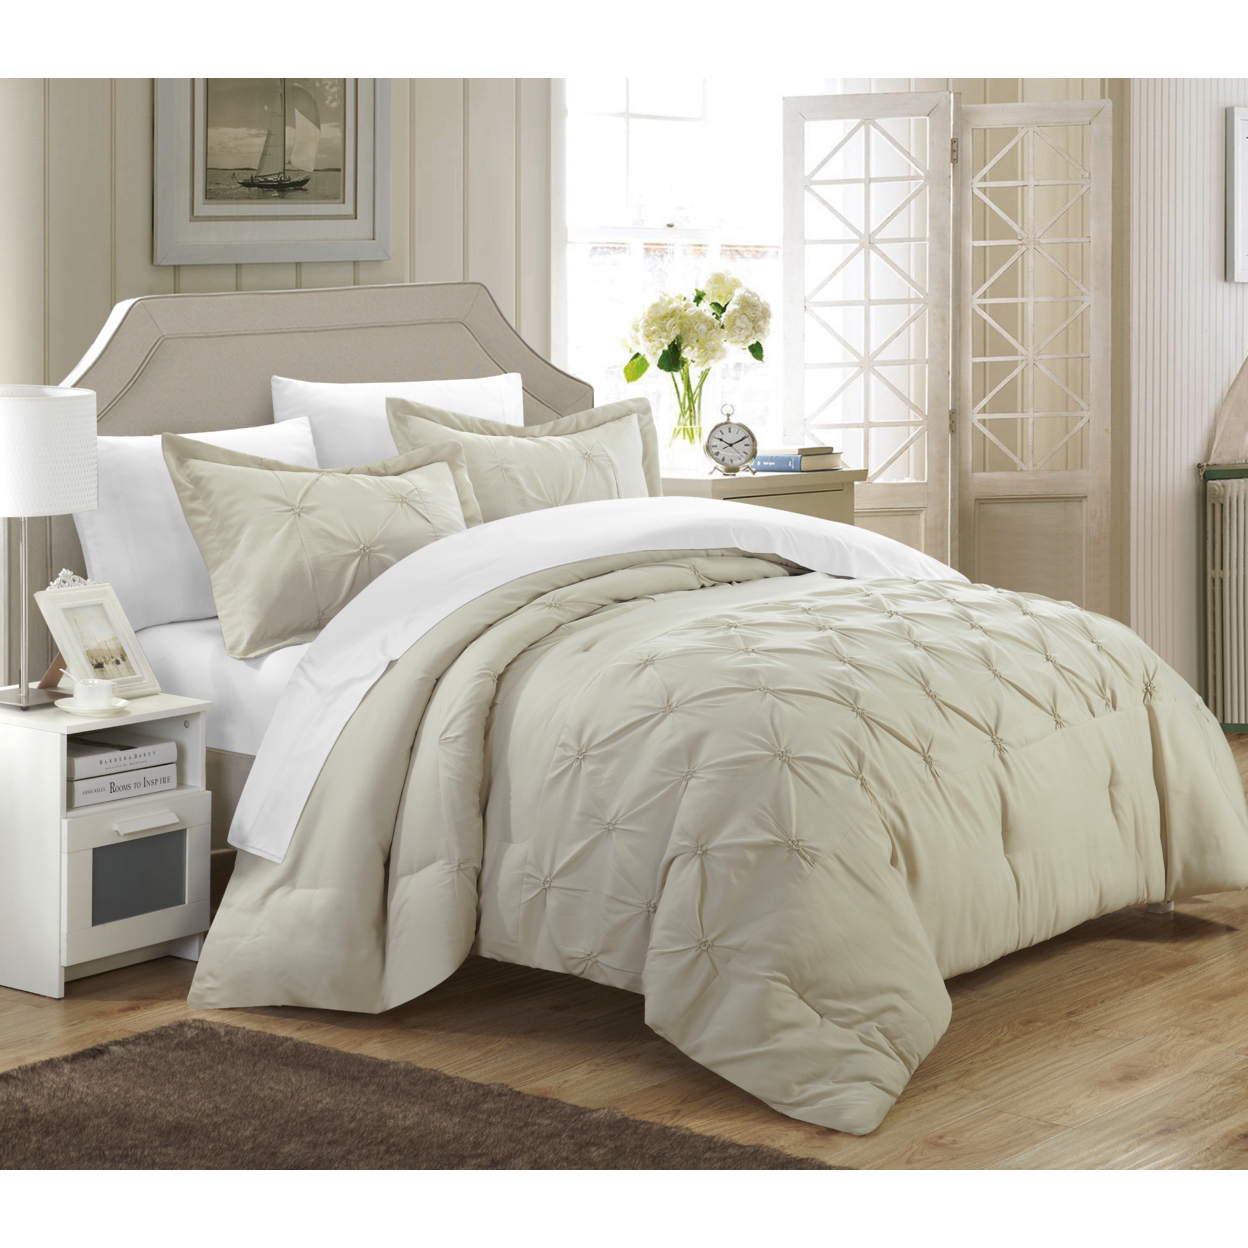 Chic Home 3 Piece Nica Pinch Pleat Pintuck Duvet Cover And Shams Set - Beige, King